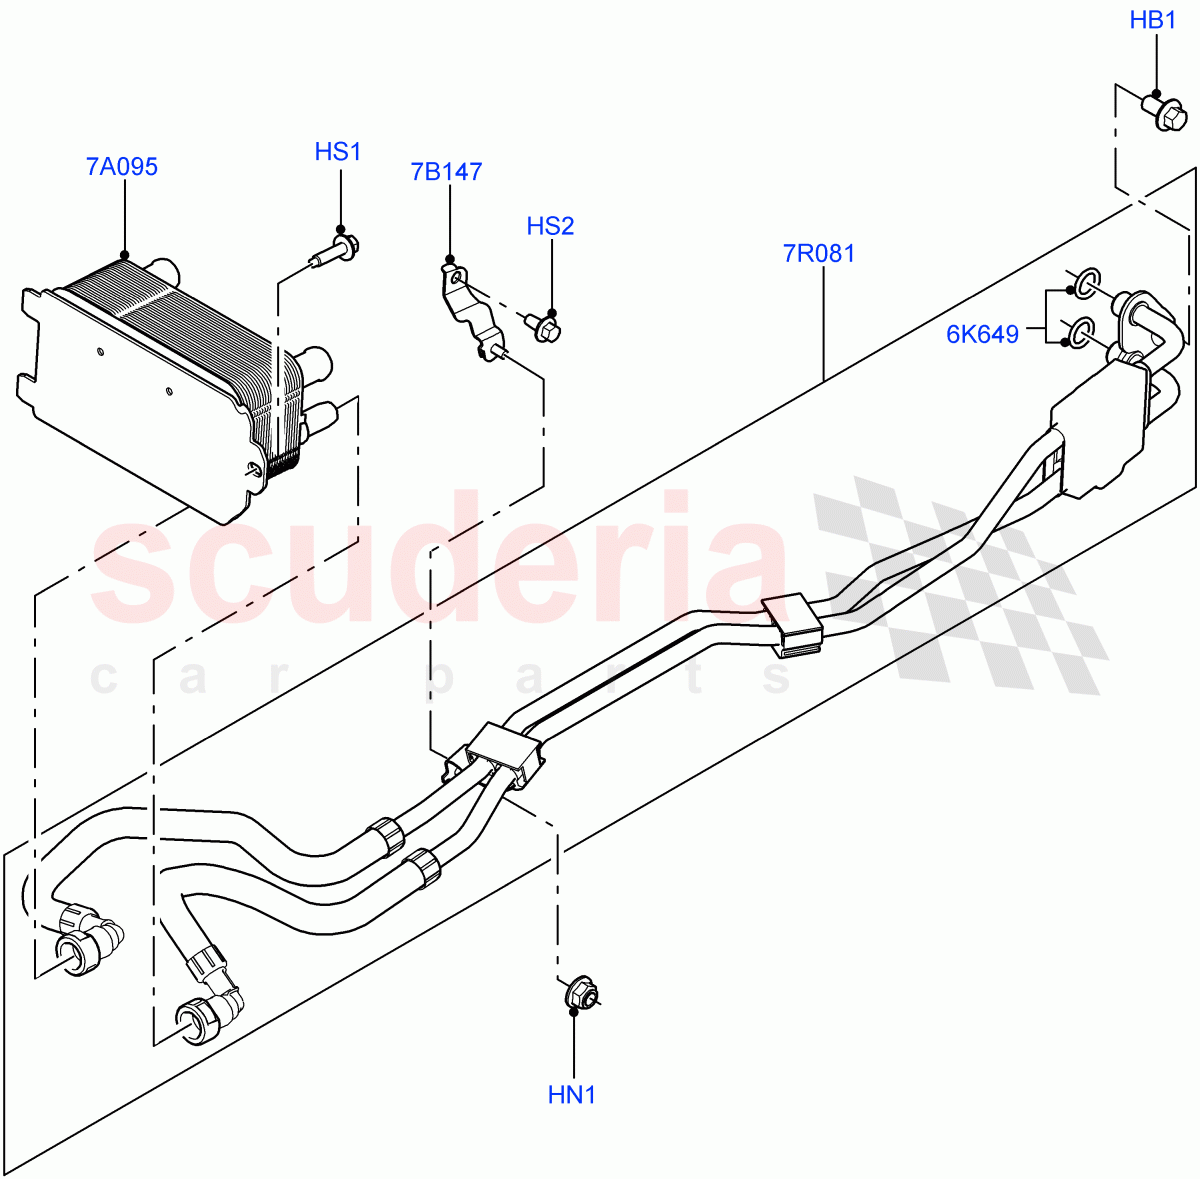 Transmission Cooling Systems(4.4L DOHC DITC V8 Diesel,8 Speed Auto Trans ZF 8HP76)((V)FROMKA000001) of Land Rover Land Rover Range Rover Sport (2014+) [2.0 Turbo Diesel]